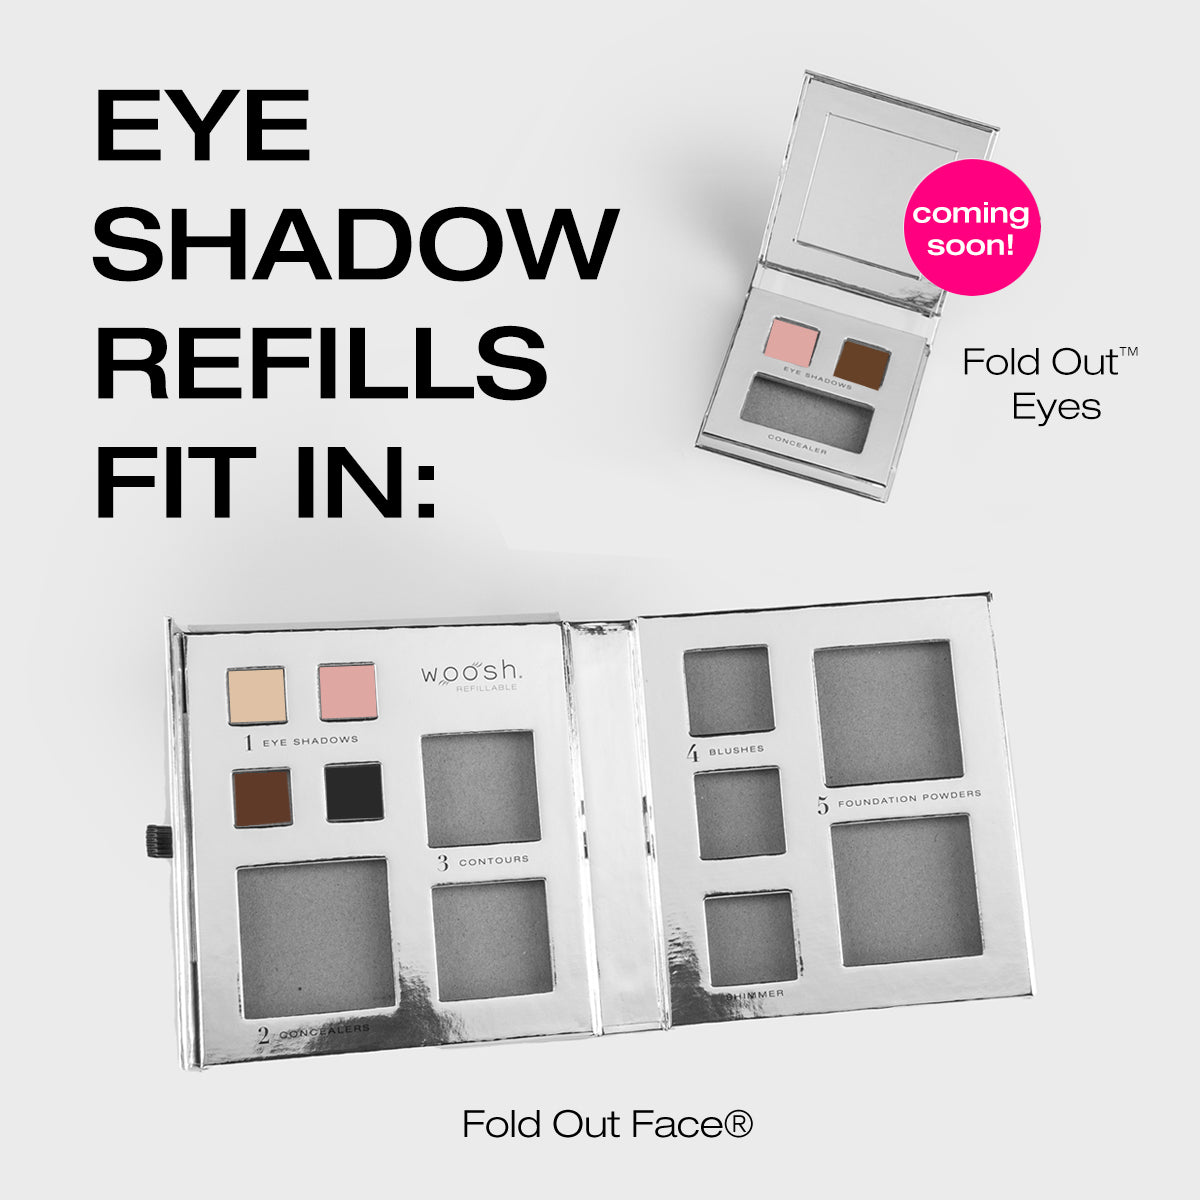 Demo of how eye shadow refills fit in the fold out eyes and fold out face